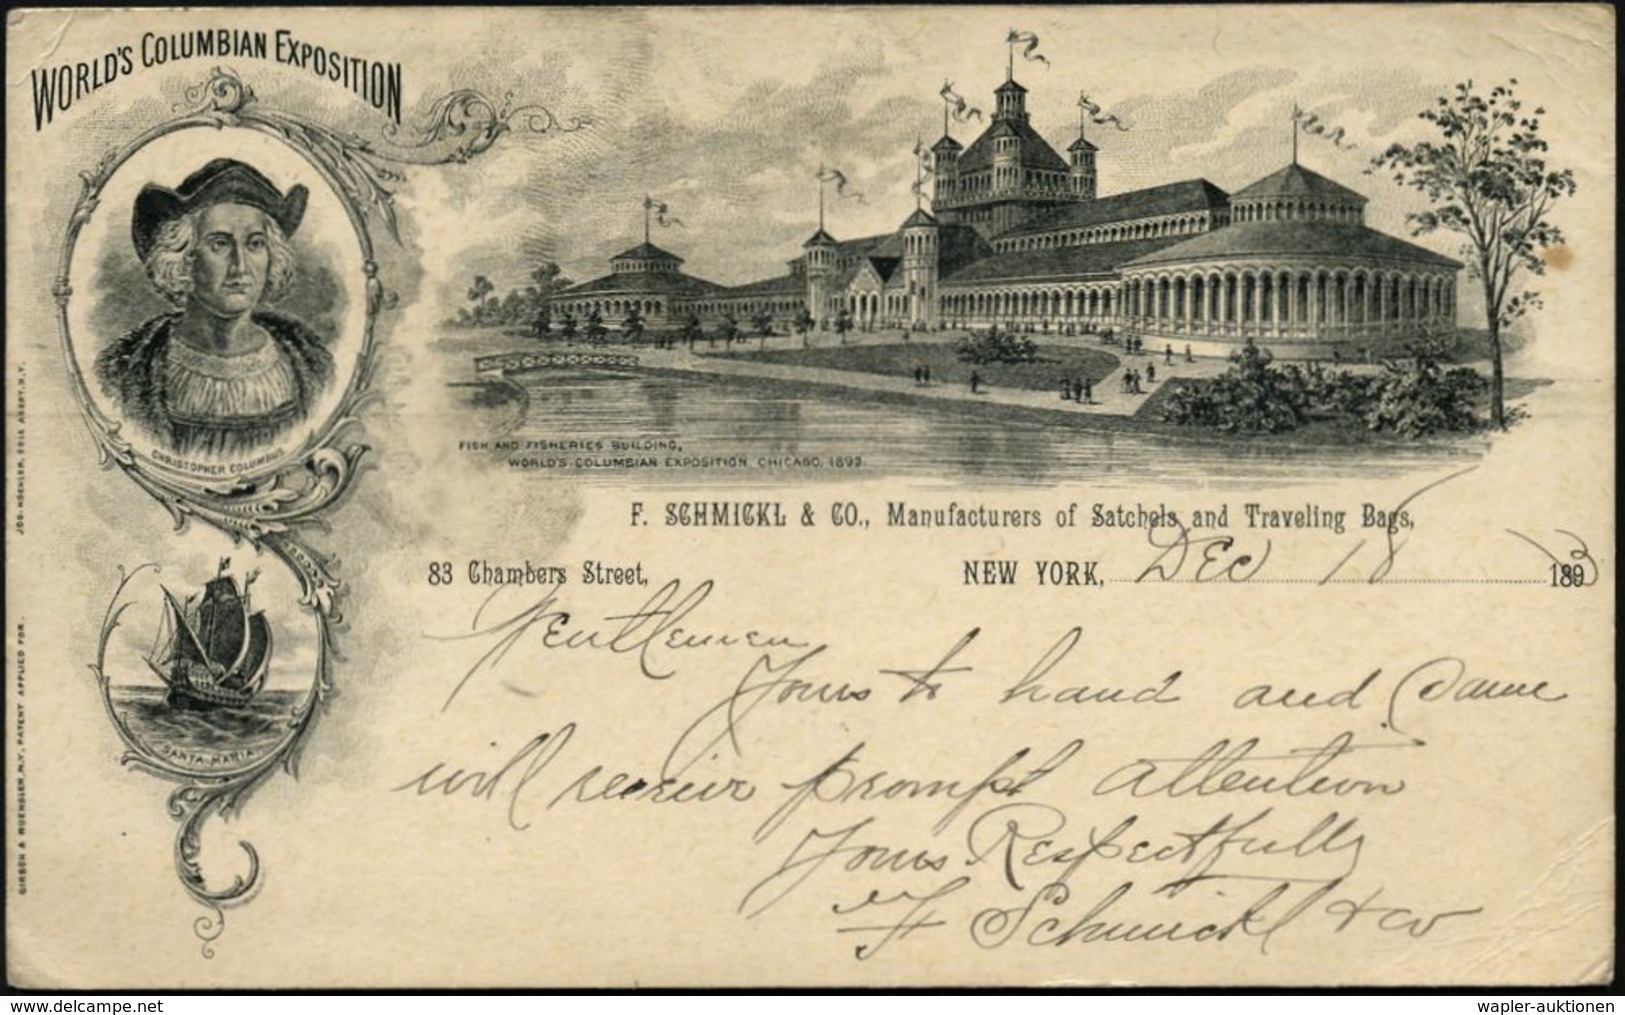 U.S.A. 1893 (18.12.) PP 1 C. Grant, Schw.: WORLD'S COLUMBIAN EXPOSITION, FISH AND FISHERIES BUILDING.. = Chr.Columbus Br - Christoffel Columbus